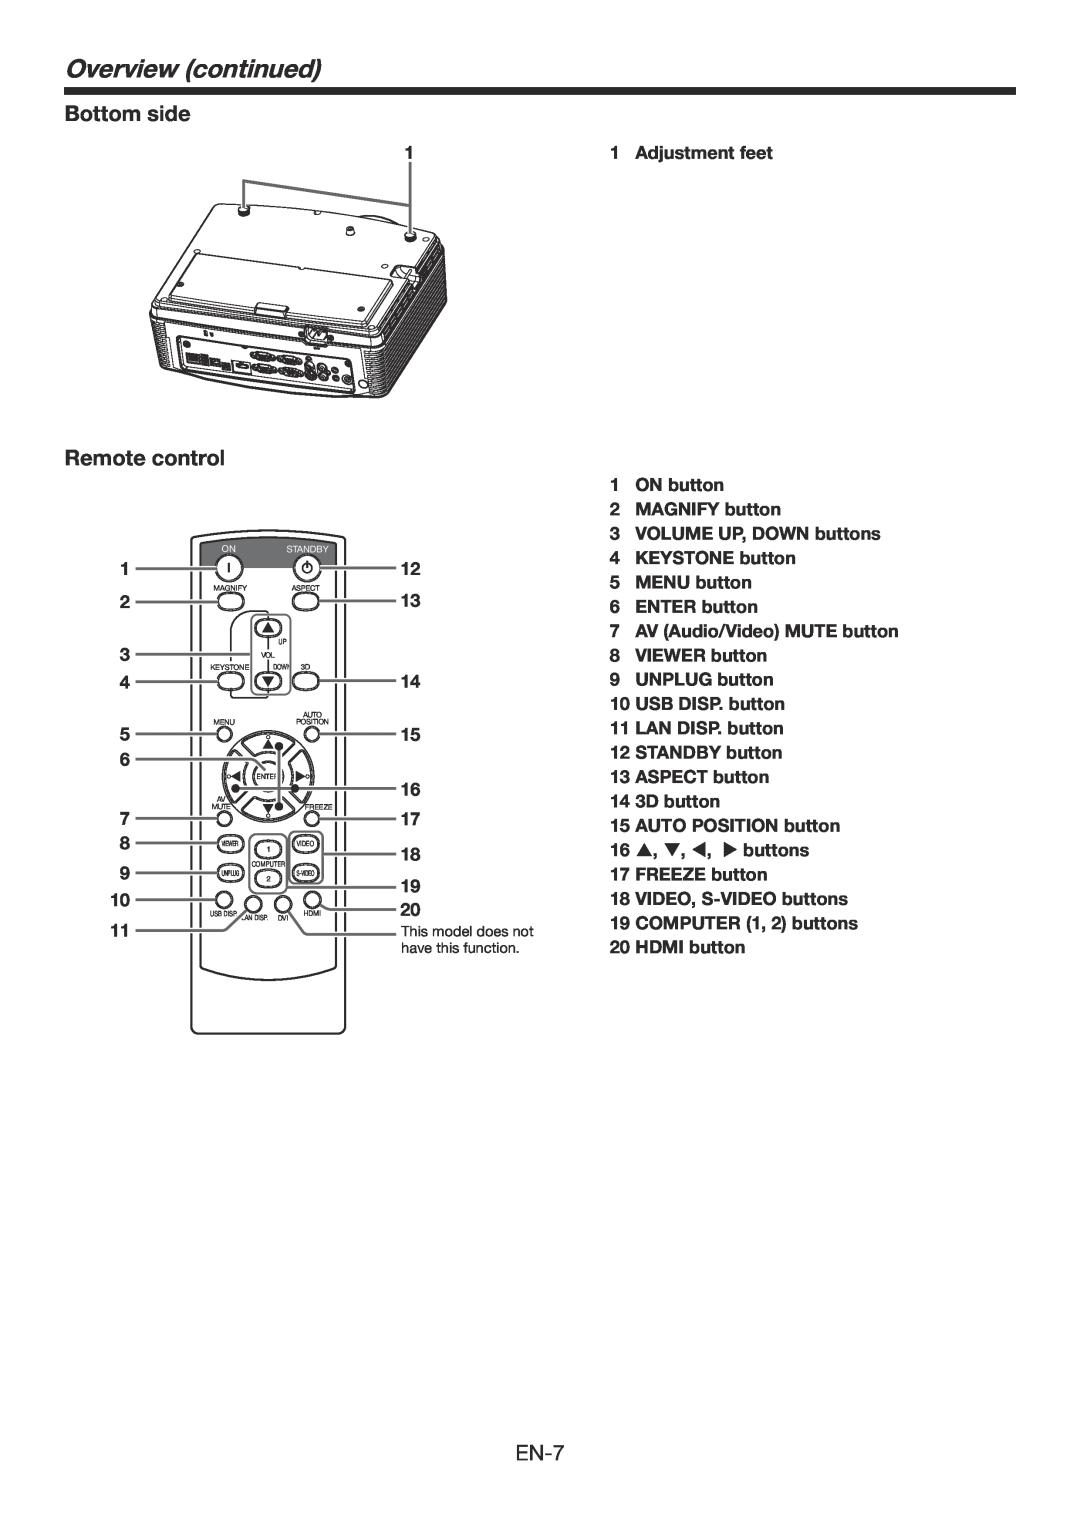 Mitsubishi Electronics WD385U-EST user manual Overview continued, Bottom side, Remote control 